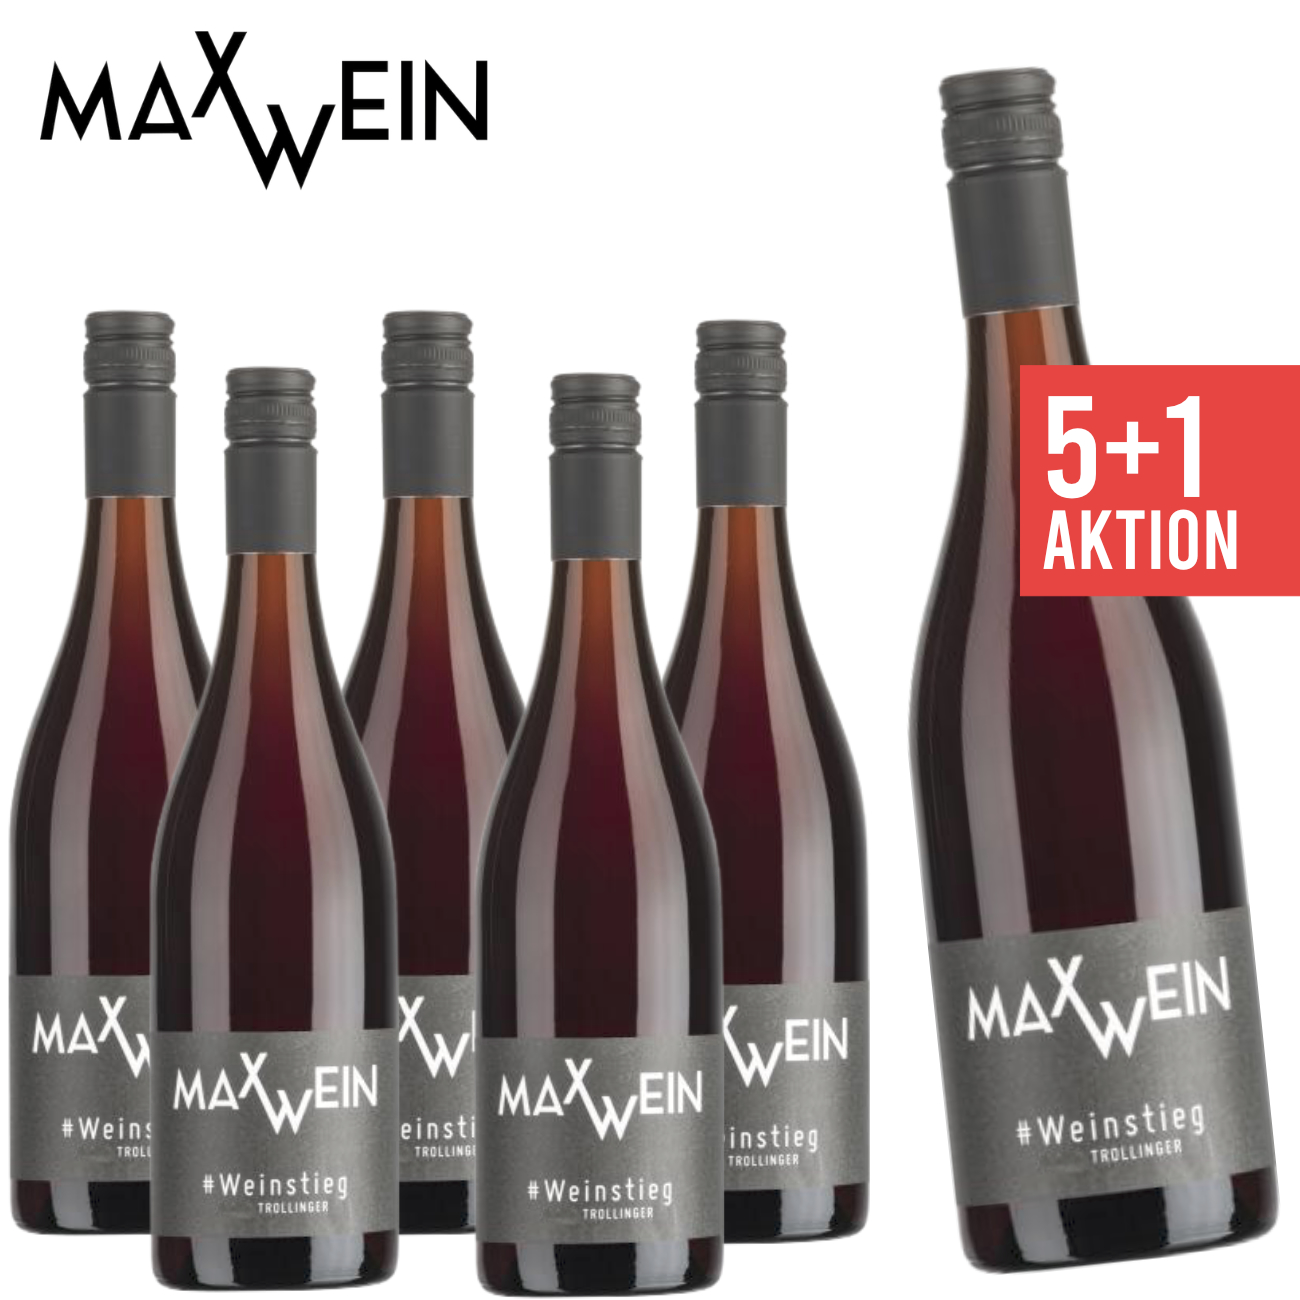 | find+buy: The wein.plus find+buy wein.plus our members of wines